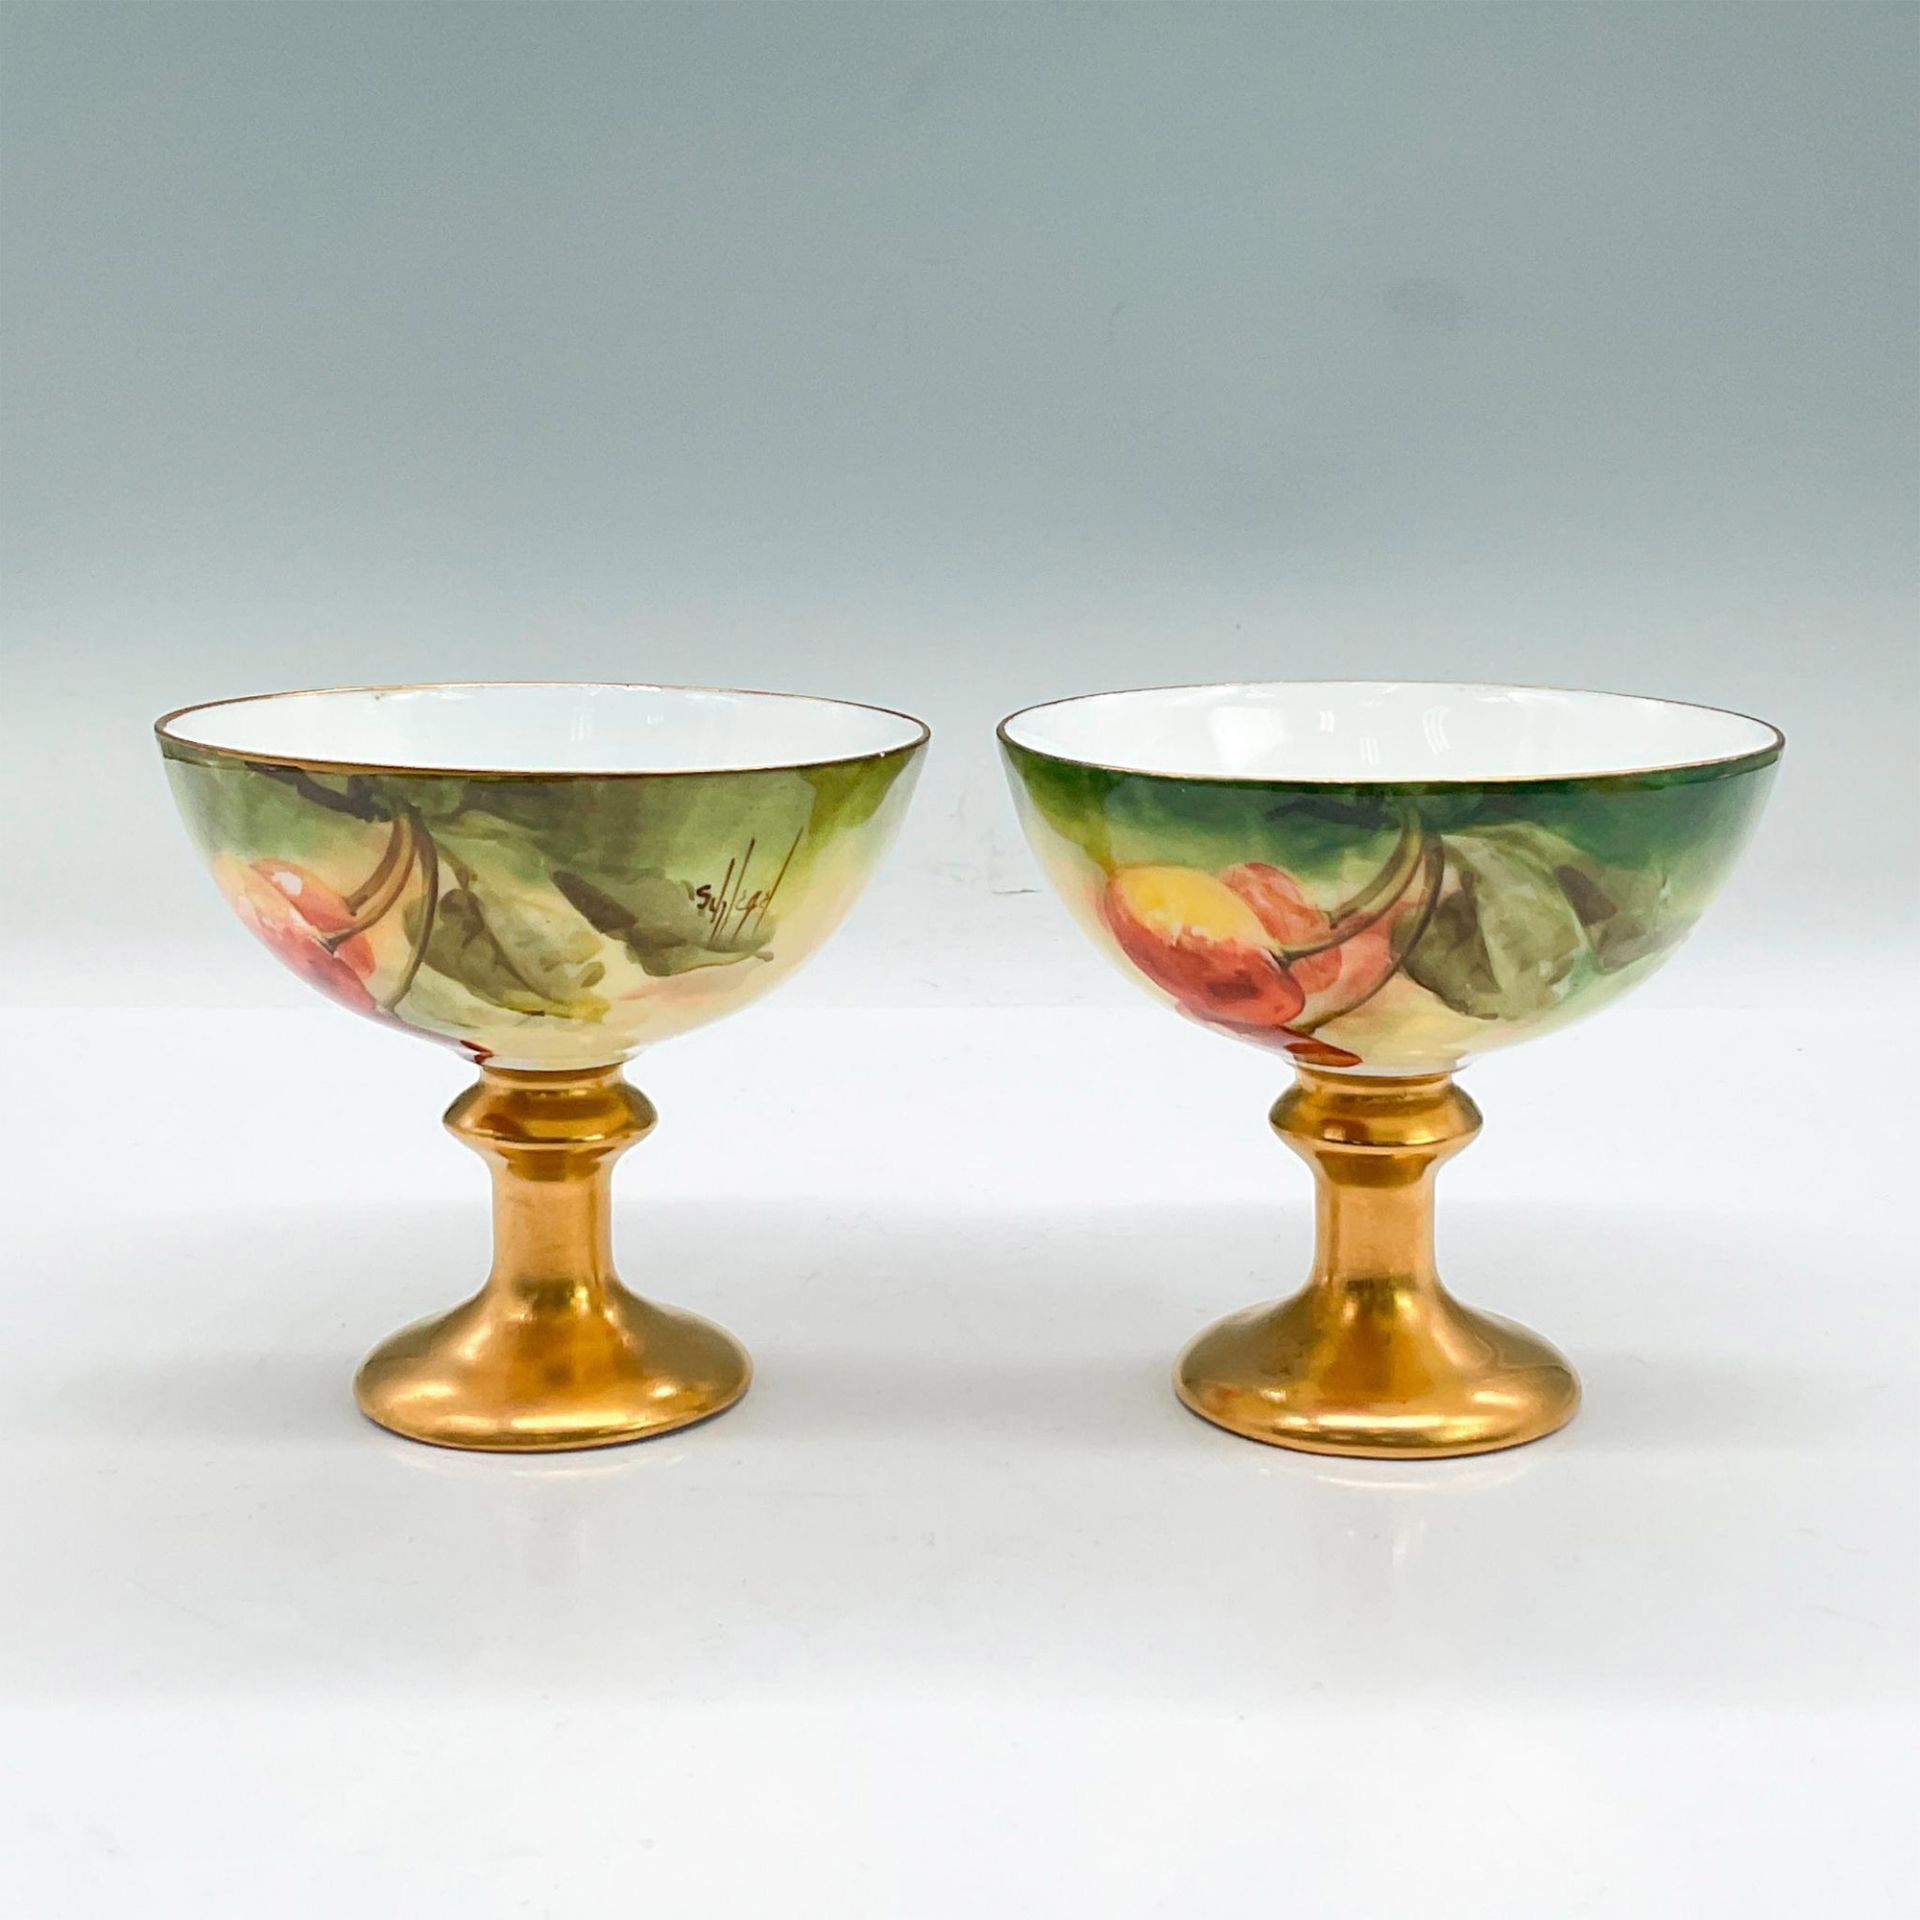 3pc T+V Limoges/Rosenthal Porcelain Bowl and Cups, Cherries - Image 6 of 7